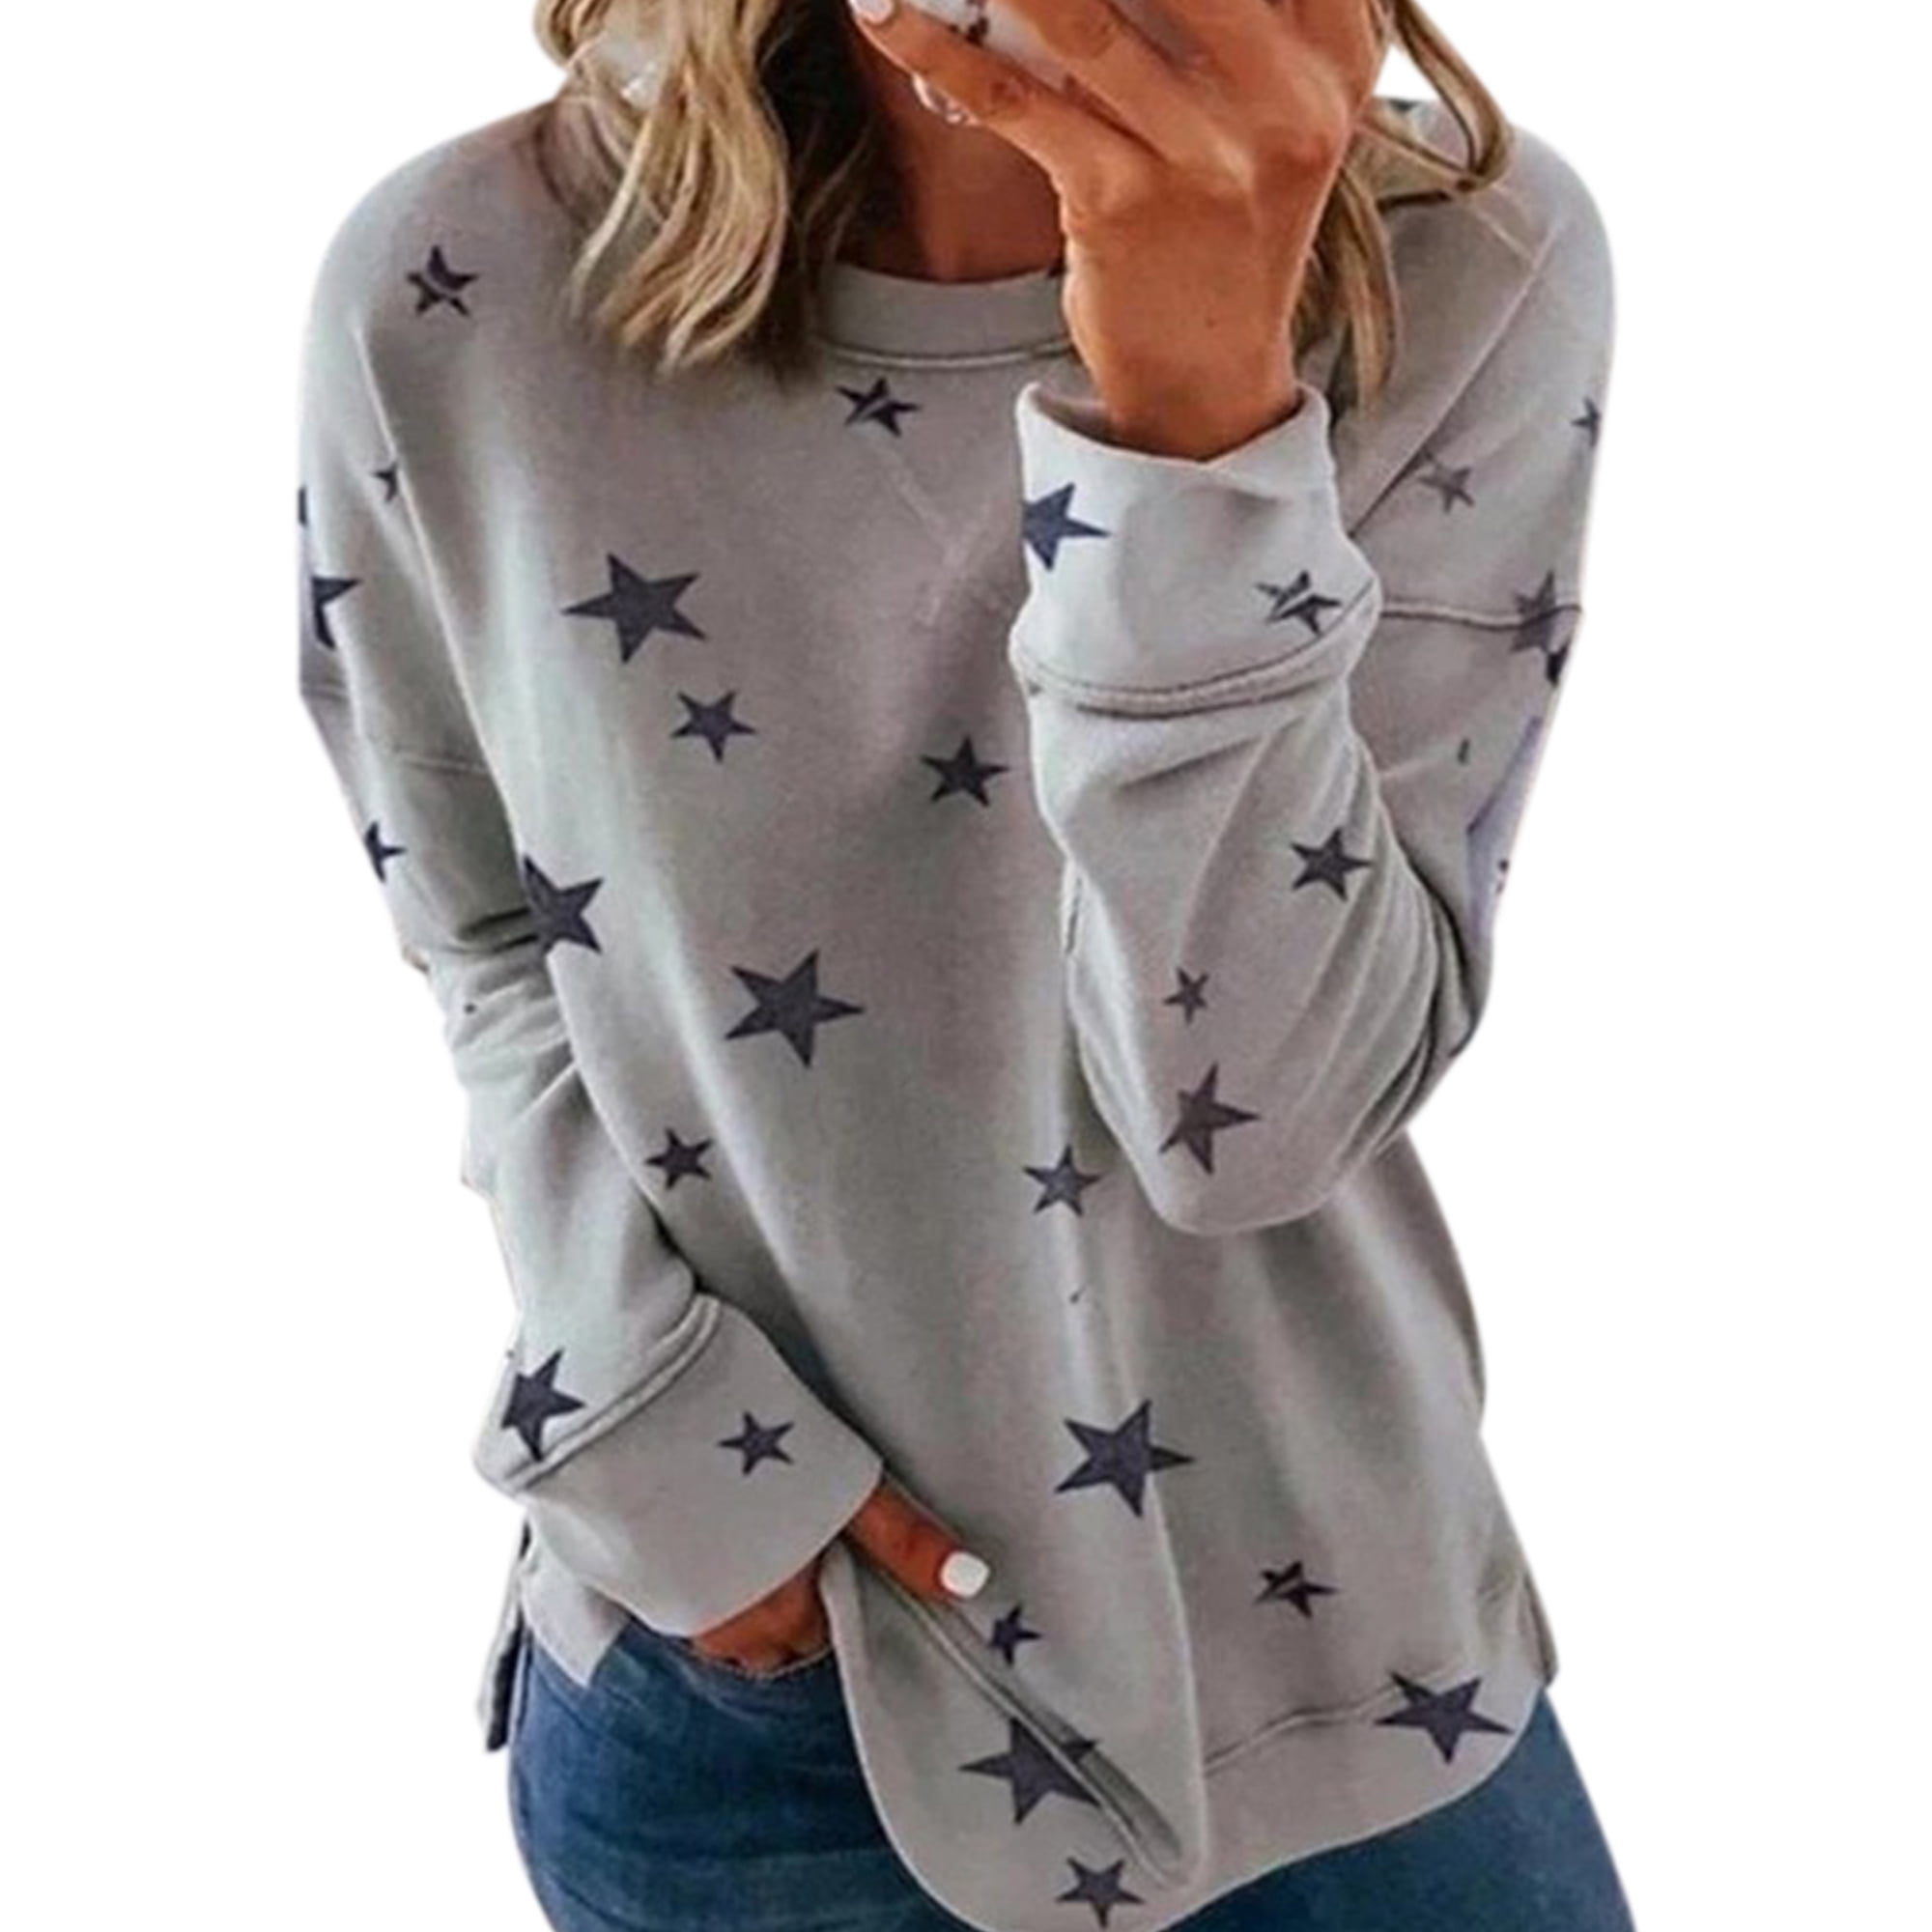 Womens Star Pullover Long Sleeve Round Neck T-shirt Ladies Casual Blouse Tops UK 